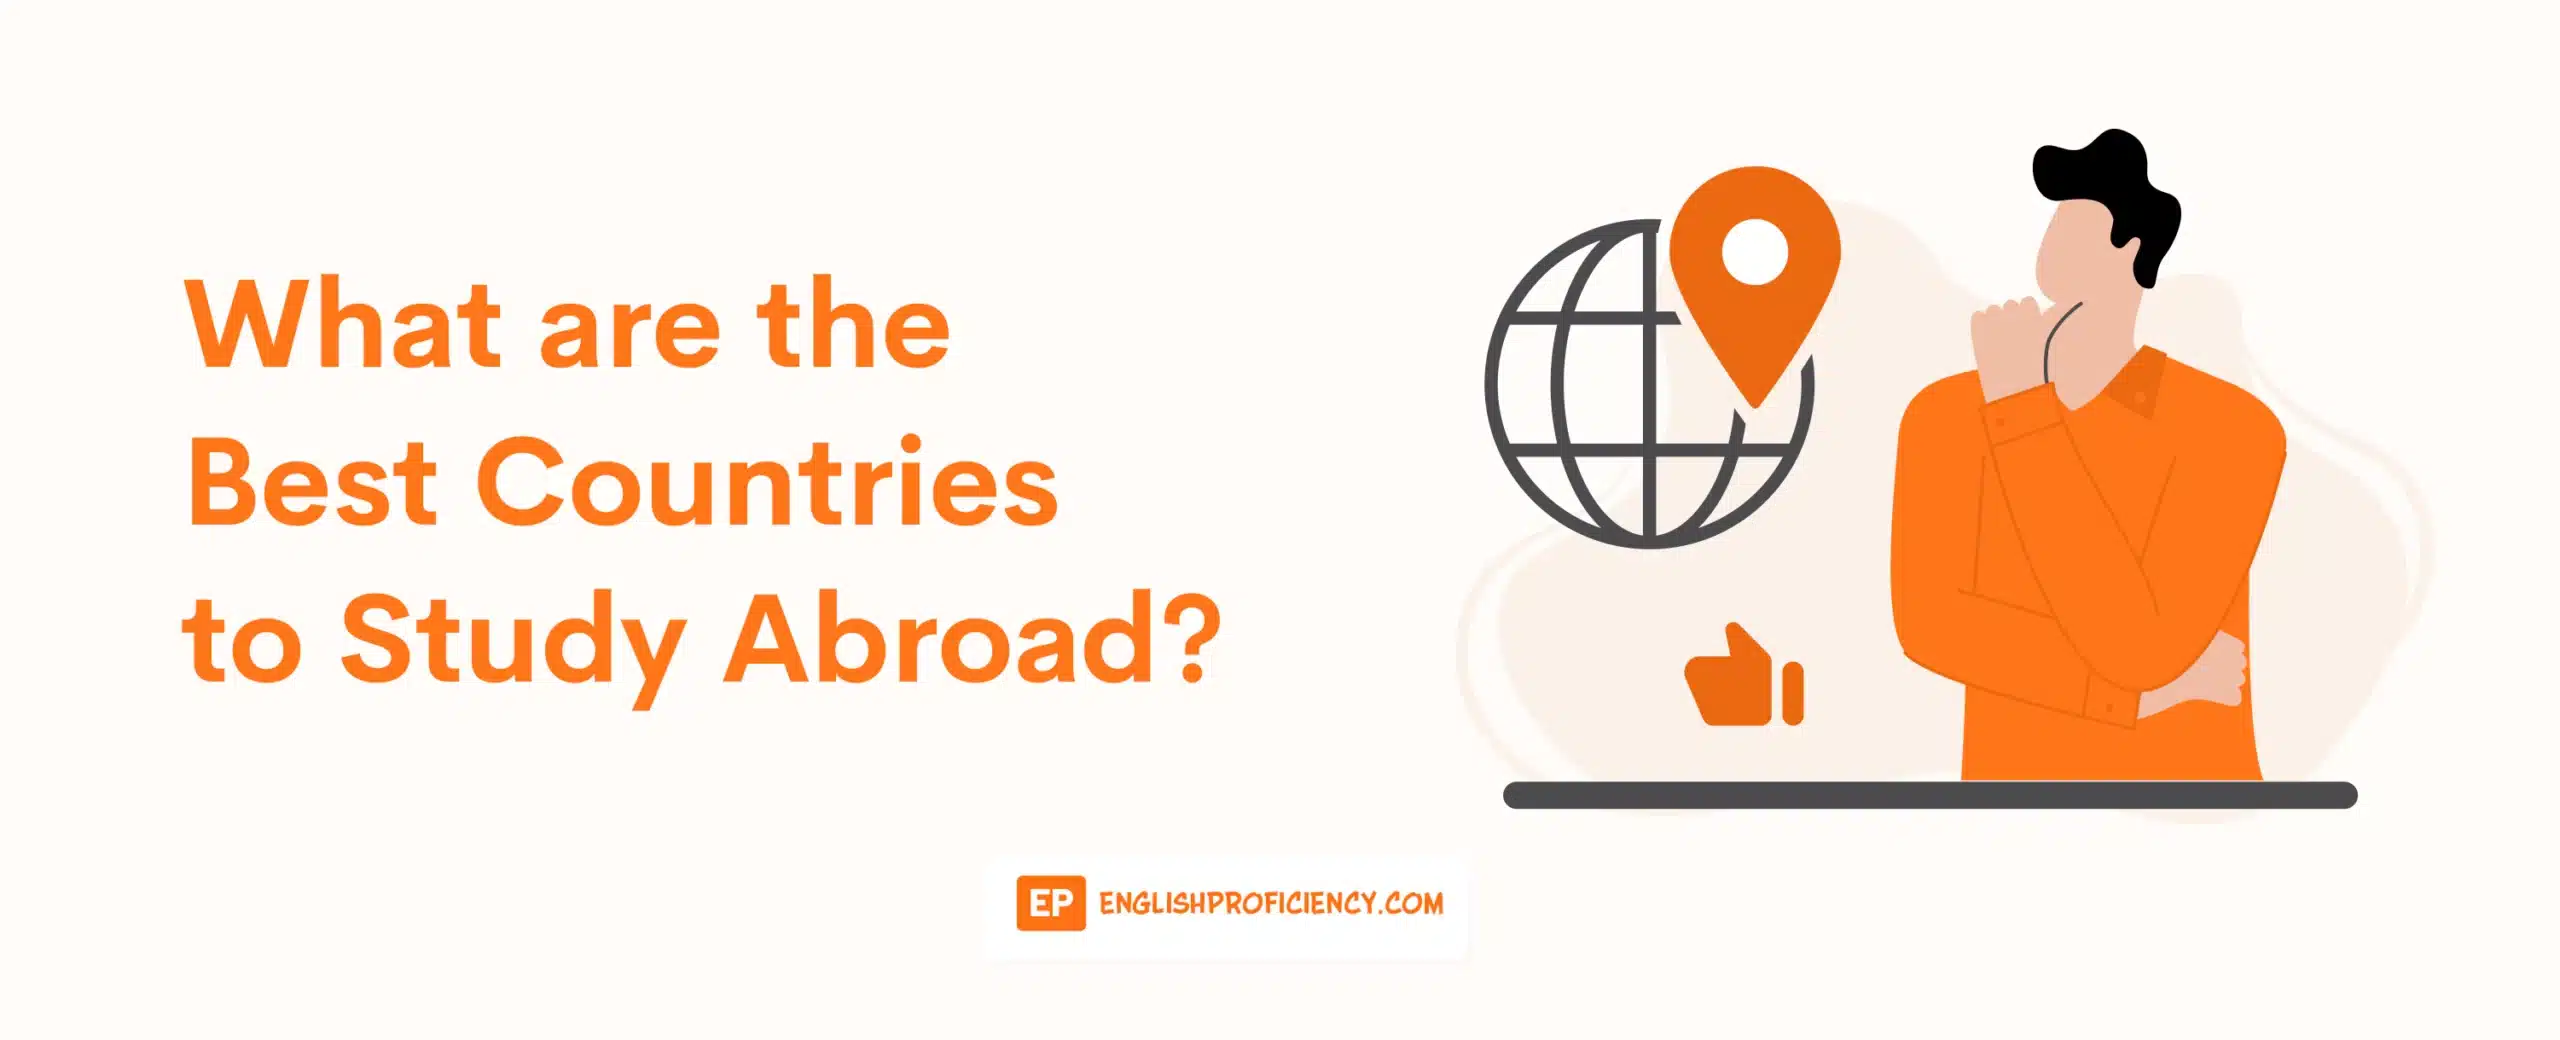 What are the Best Countries to Study Abroad